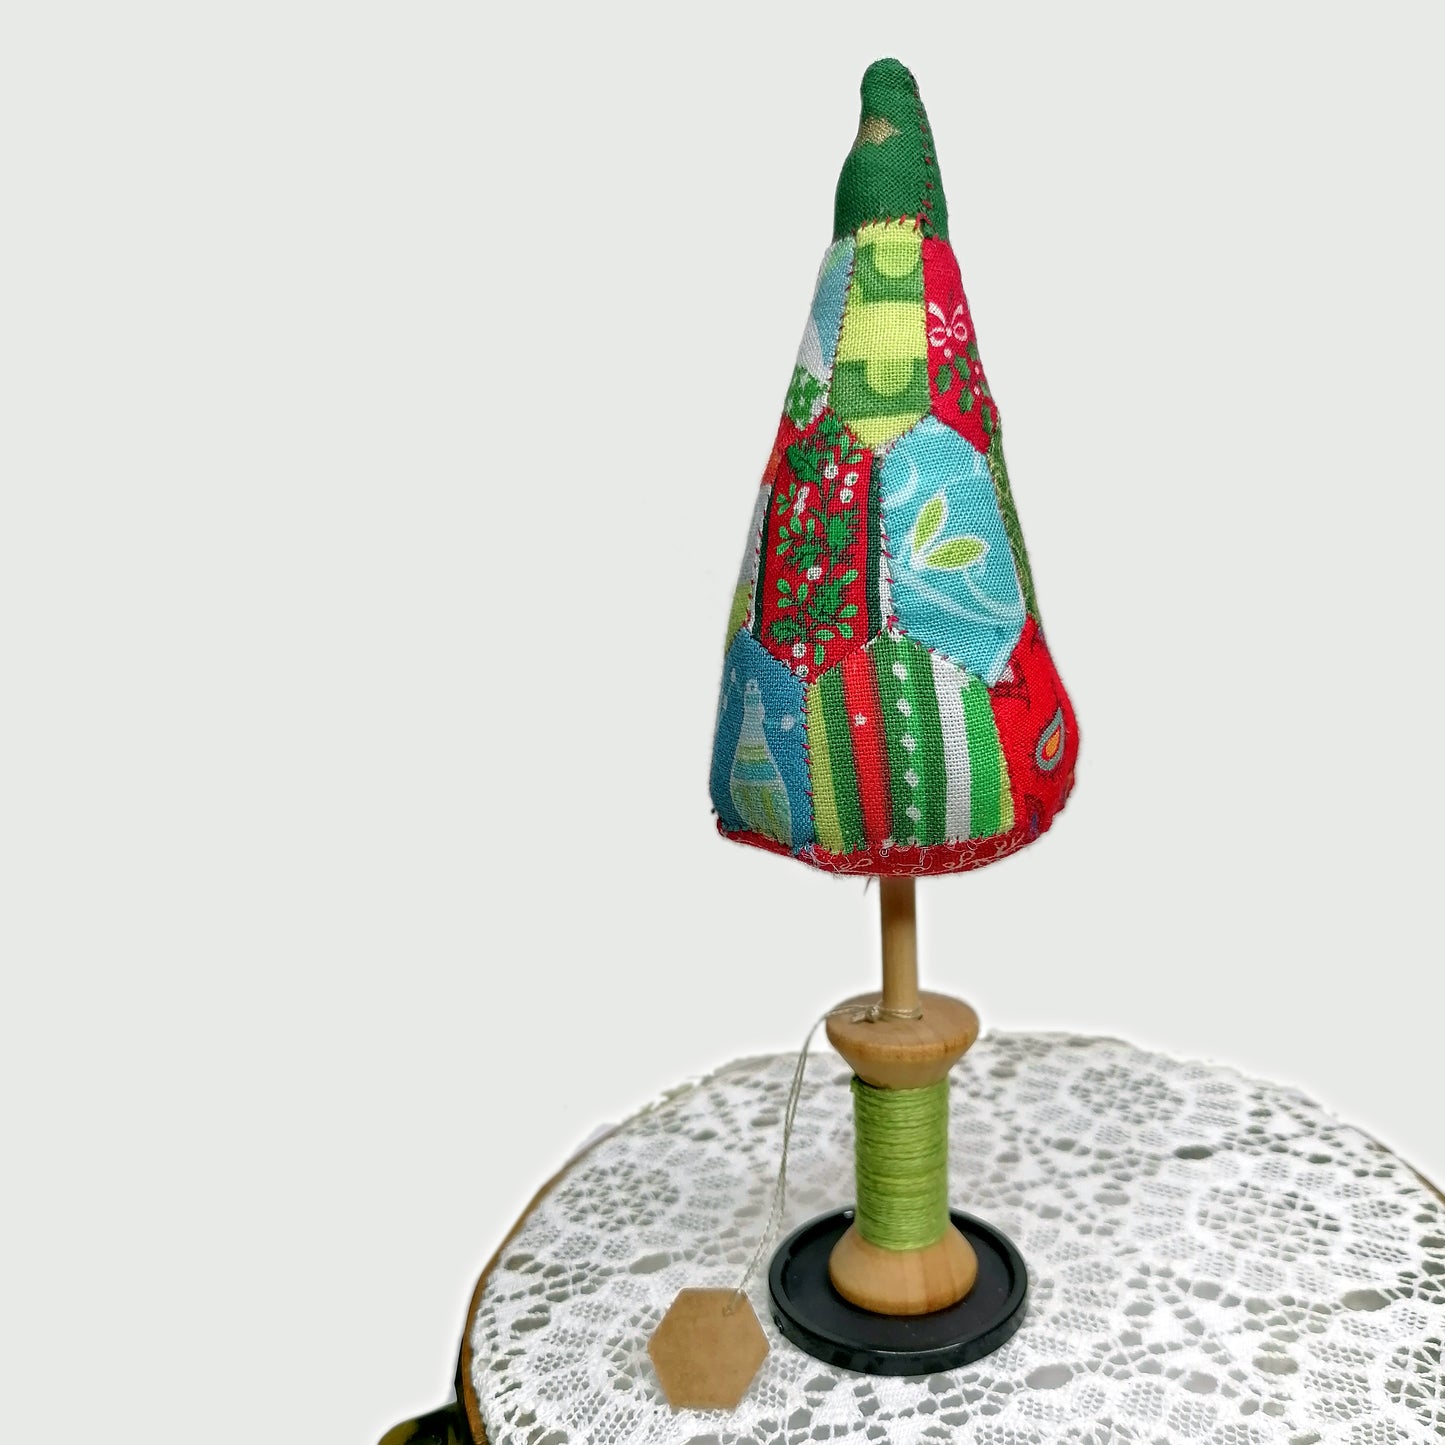 Miniature Patchwork Christmas Trees